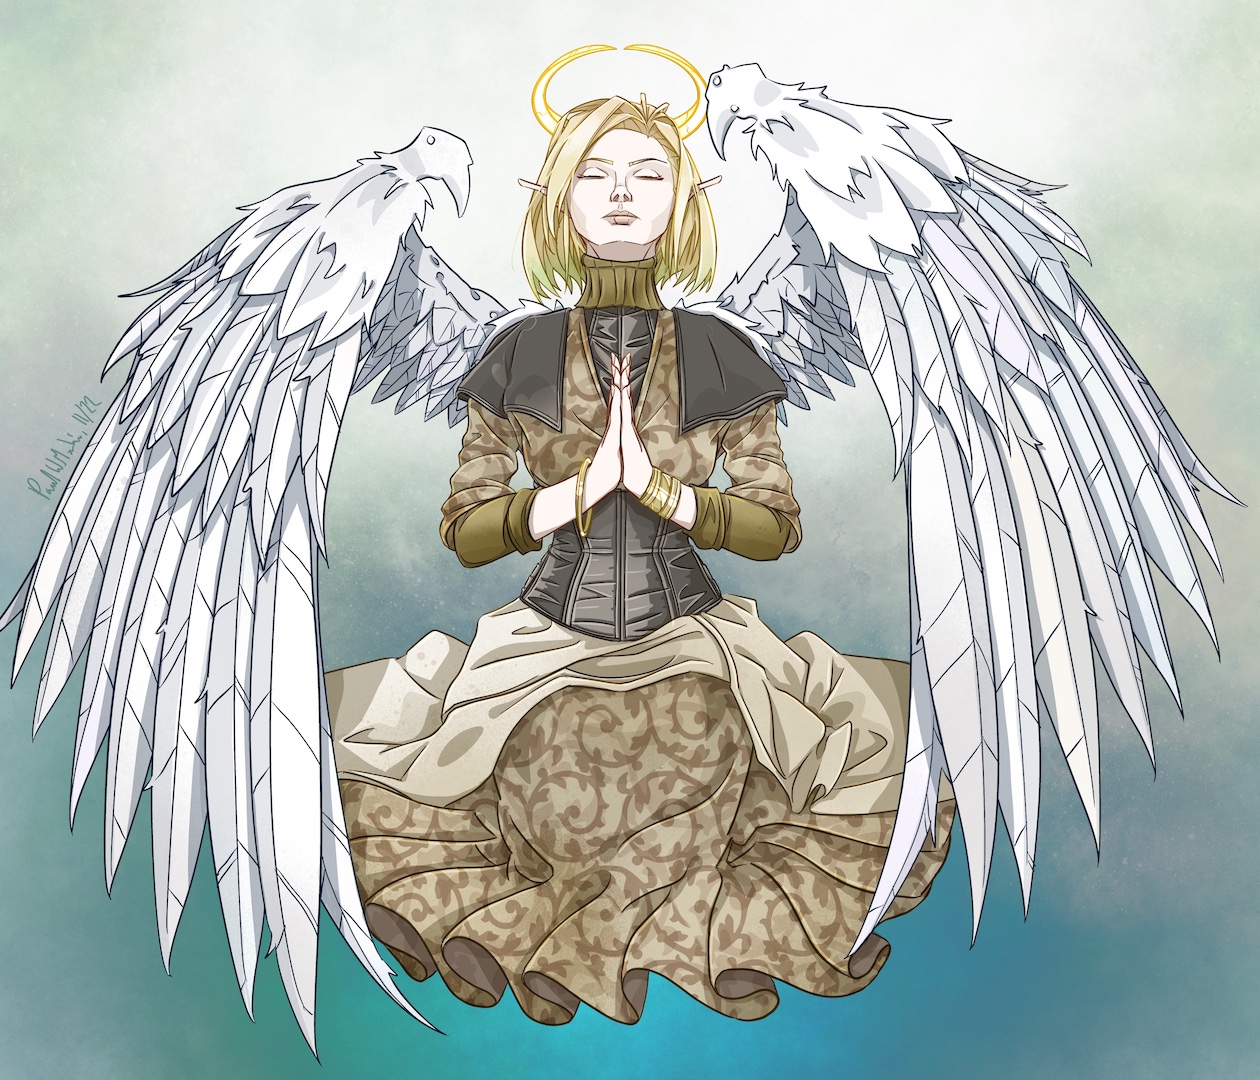 A golden-haired angel knelt in prayer, framed on both sides by large white feathered wings. A crescent gold halo floats above her head. She is dressed in a long thorn-patterned copper-and-beige dress with a dark grey corset. She had golden bracelets and bangles adorning her wrists.